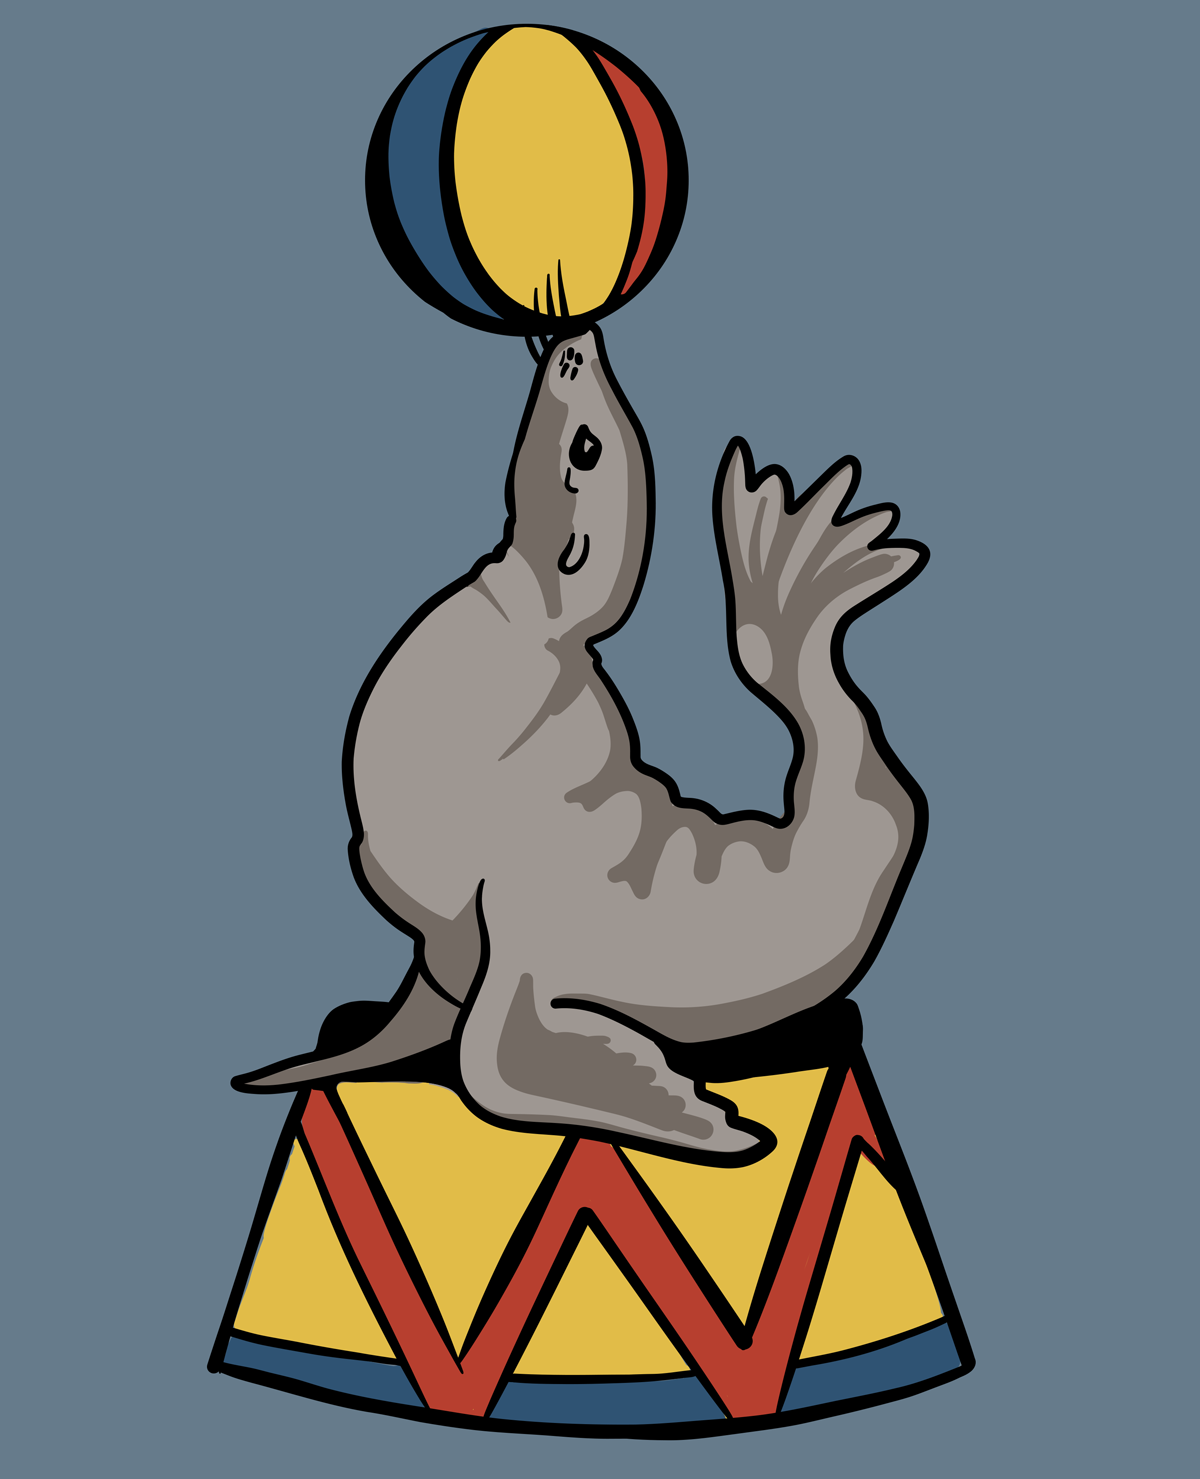 A circus sea lion perched on a stand balances a beach ball on its nose, illustration.